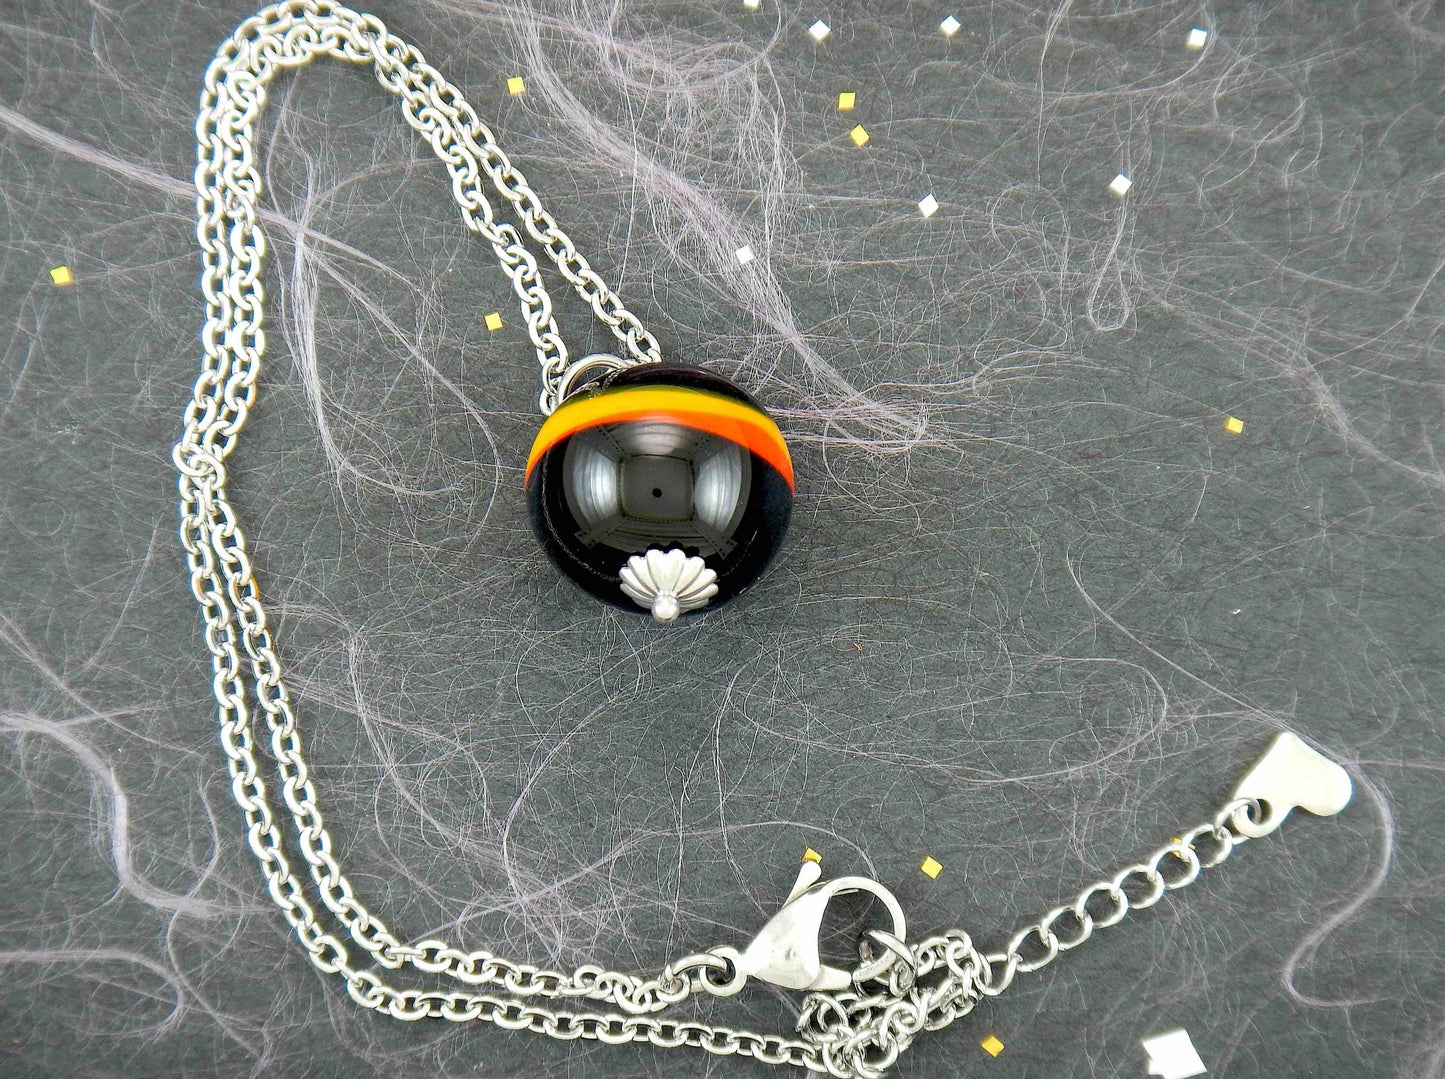 14-inch necklace with funky black ball marbled in red and yellow (Murano-style glass handmade in Montreal), stainless steel chain